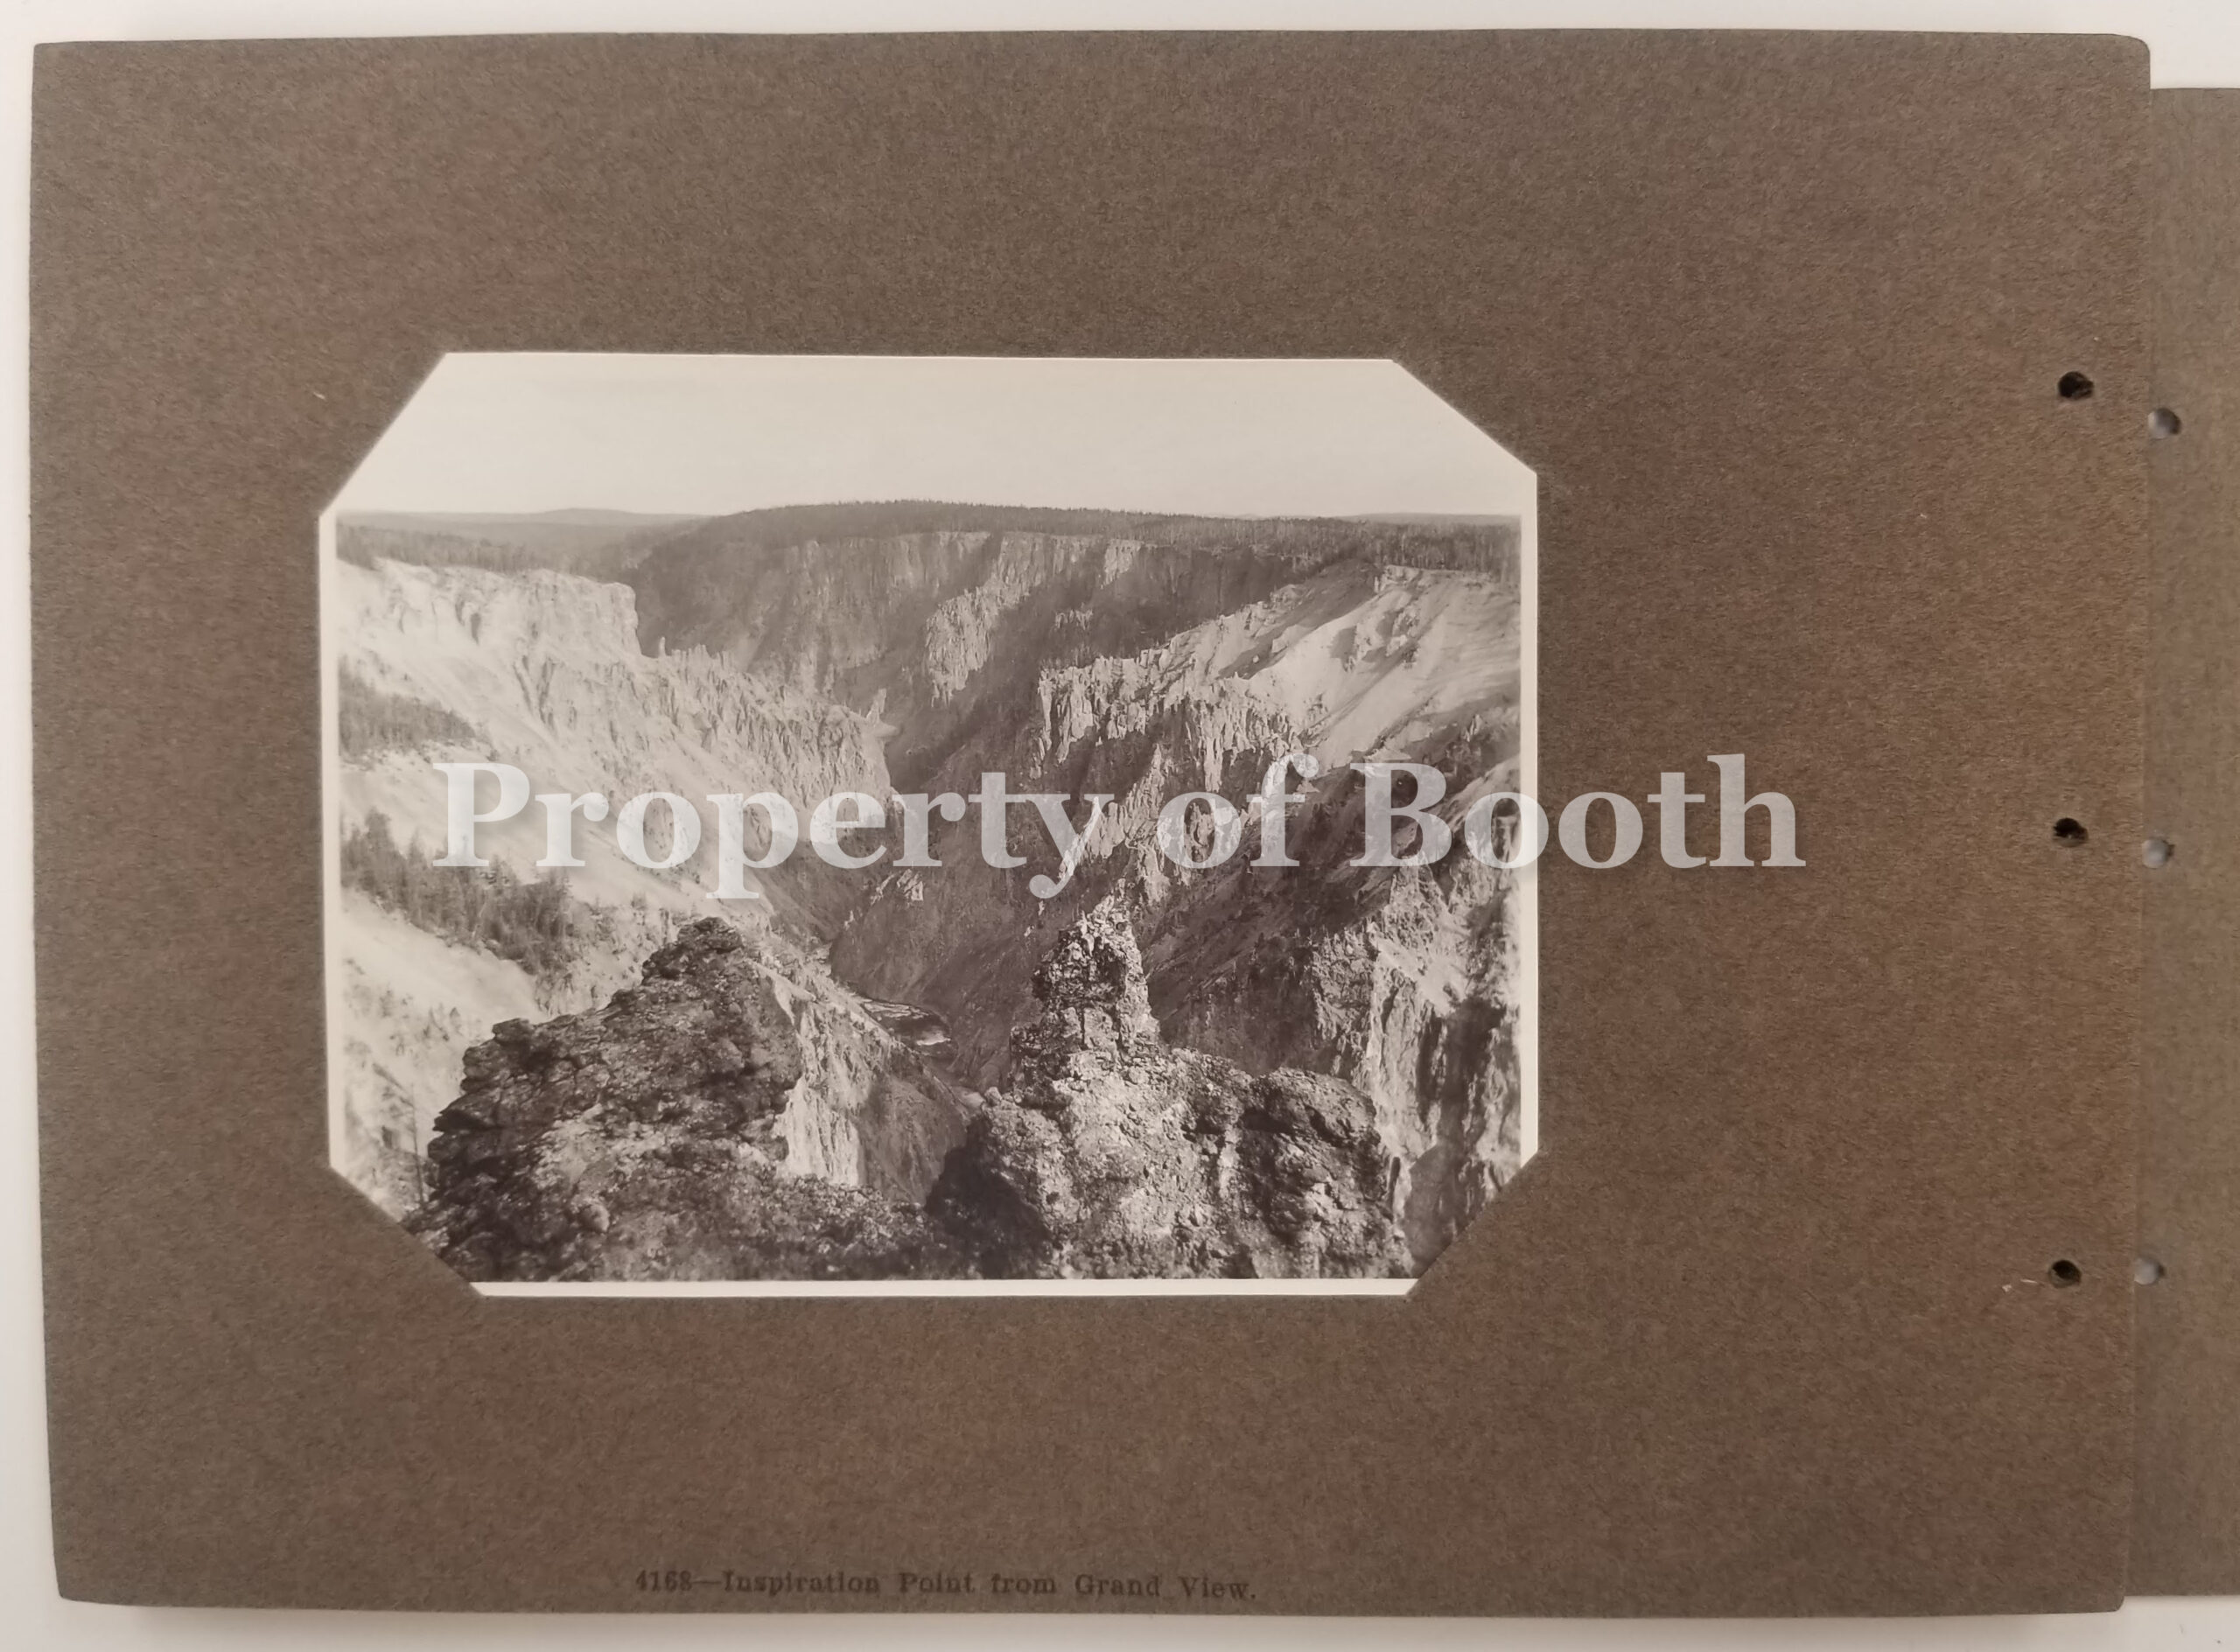 © Frank Jay Haynes, 4168 - Inspiration Point from Grand View, 1883, Silver Print, 3.5" x 4.5"